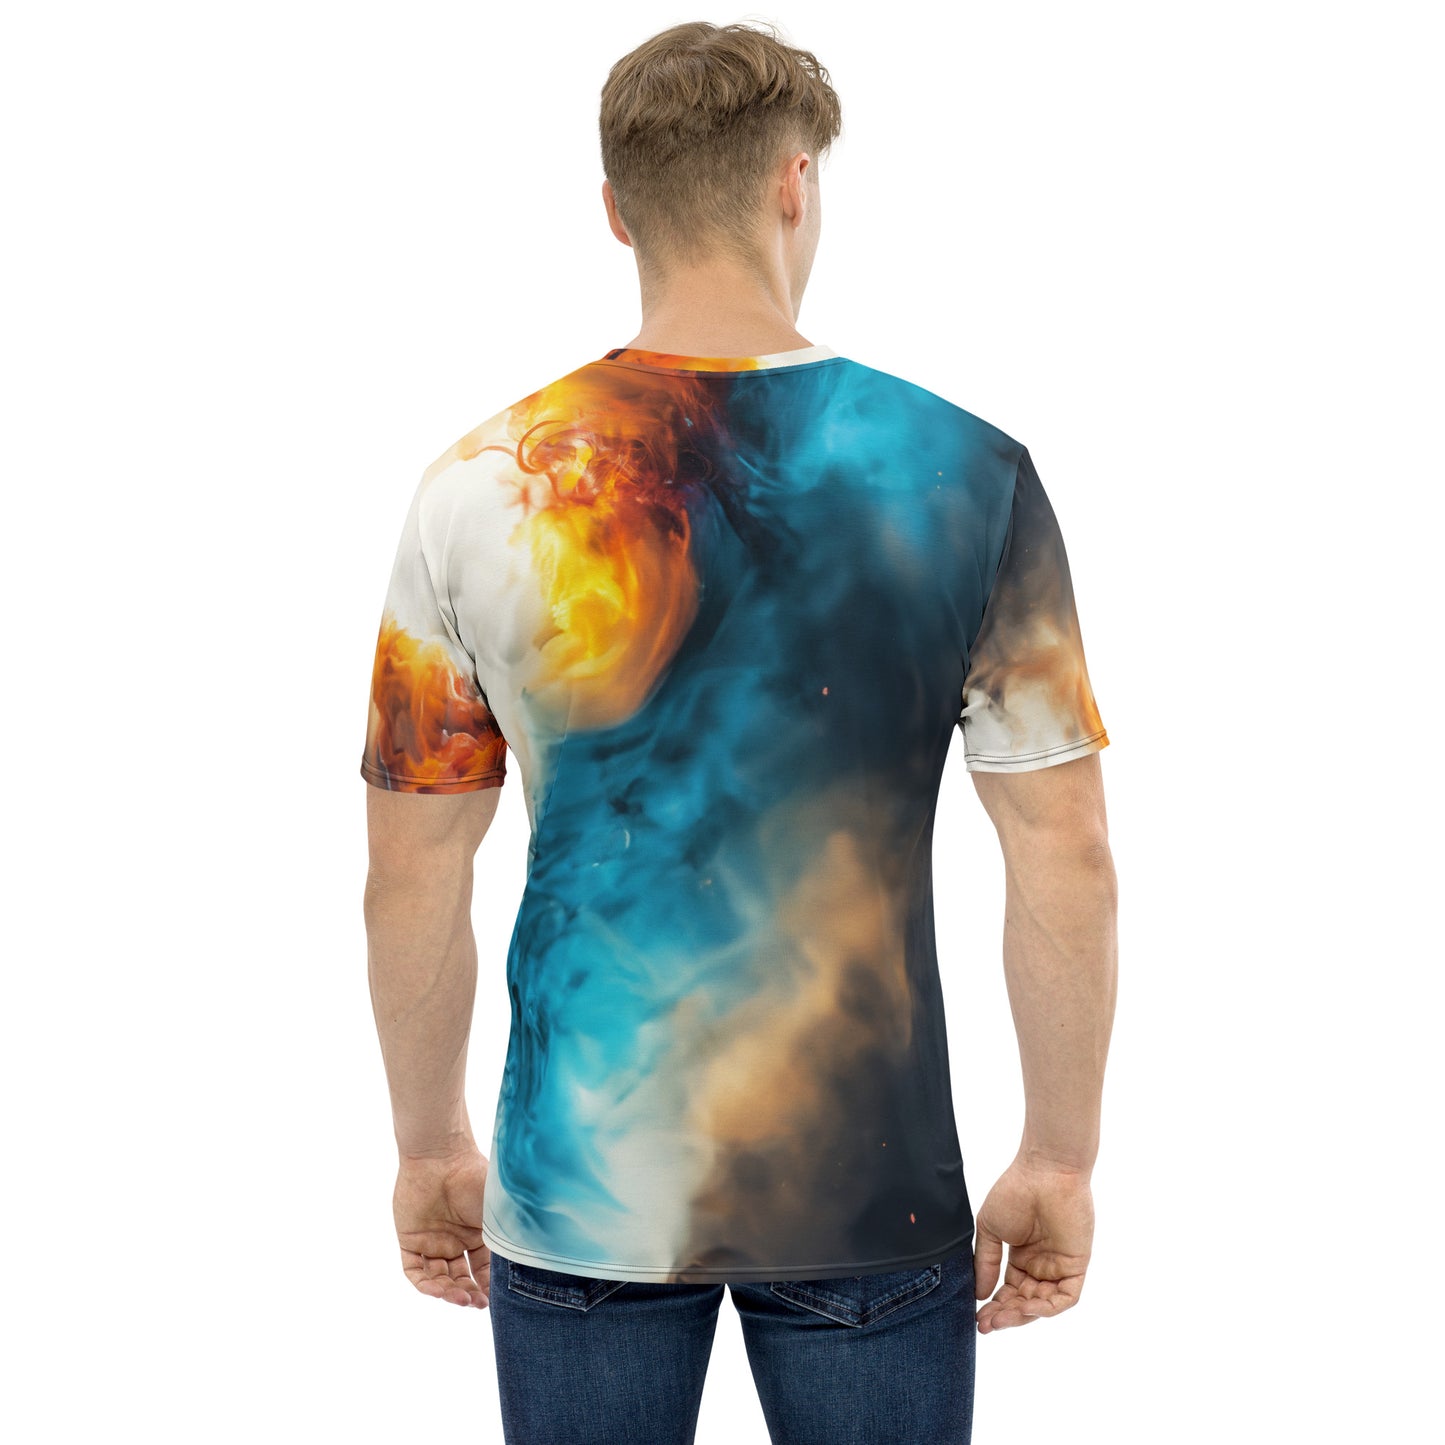 Fire and Ice Bear All Over Print Men's T-Shirt